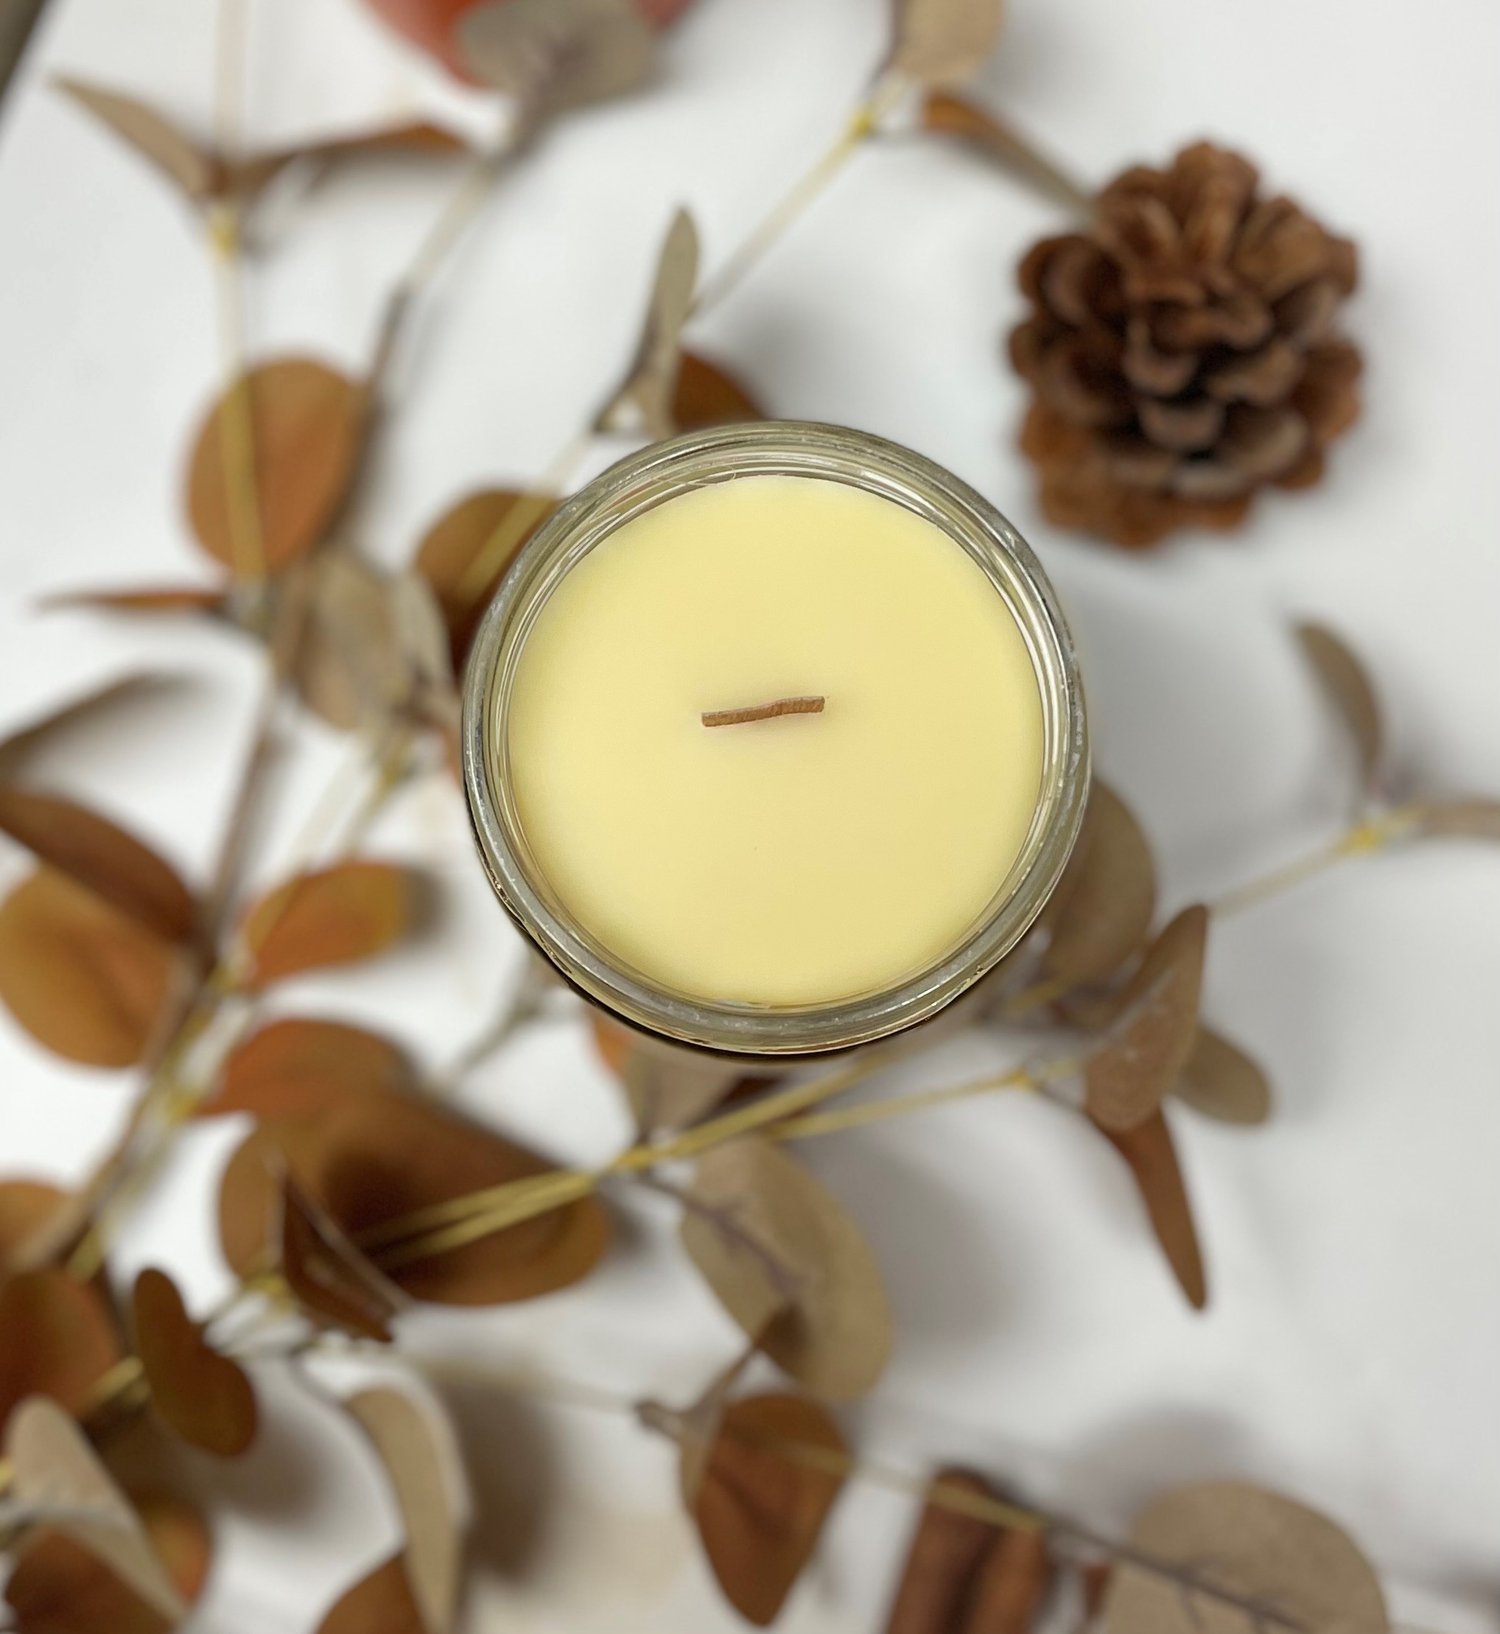 100% BEESWAX 8 DEVOTIONAL CANDLE